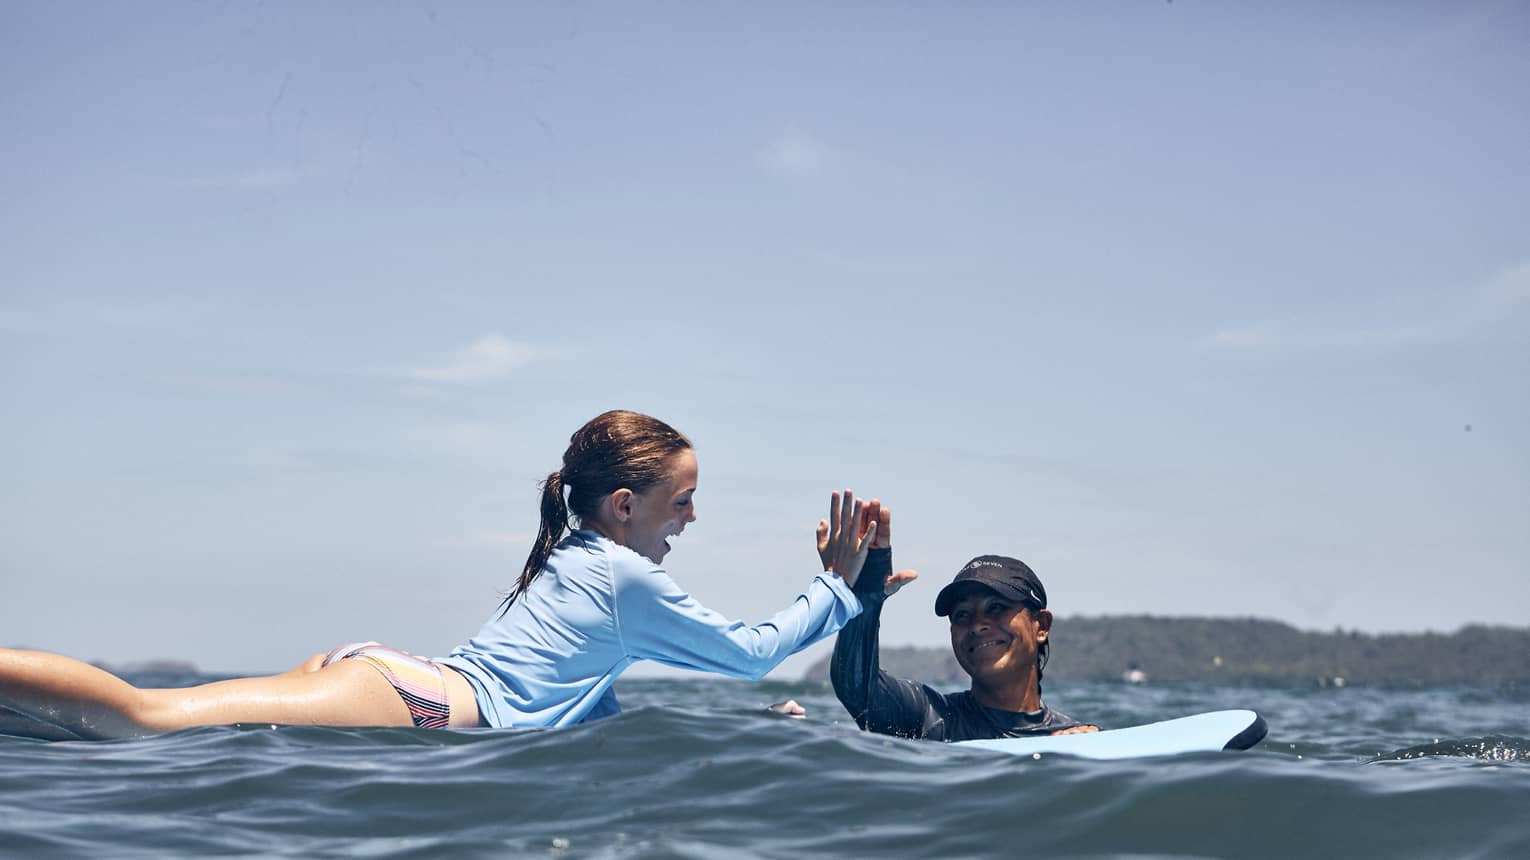 Amid gently rippling waves, a smiling child lies on a surfboard and high-fives an encouraging instructor in the water.